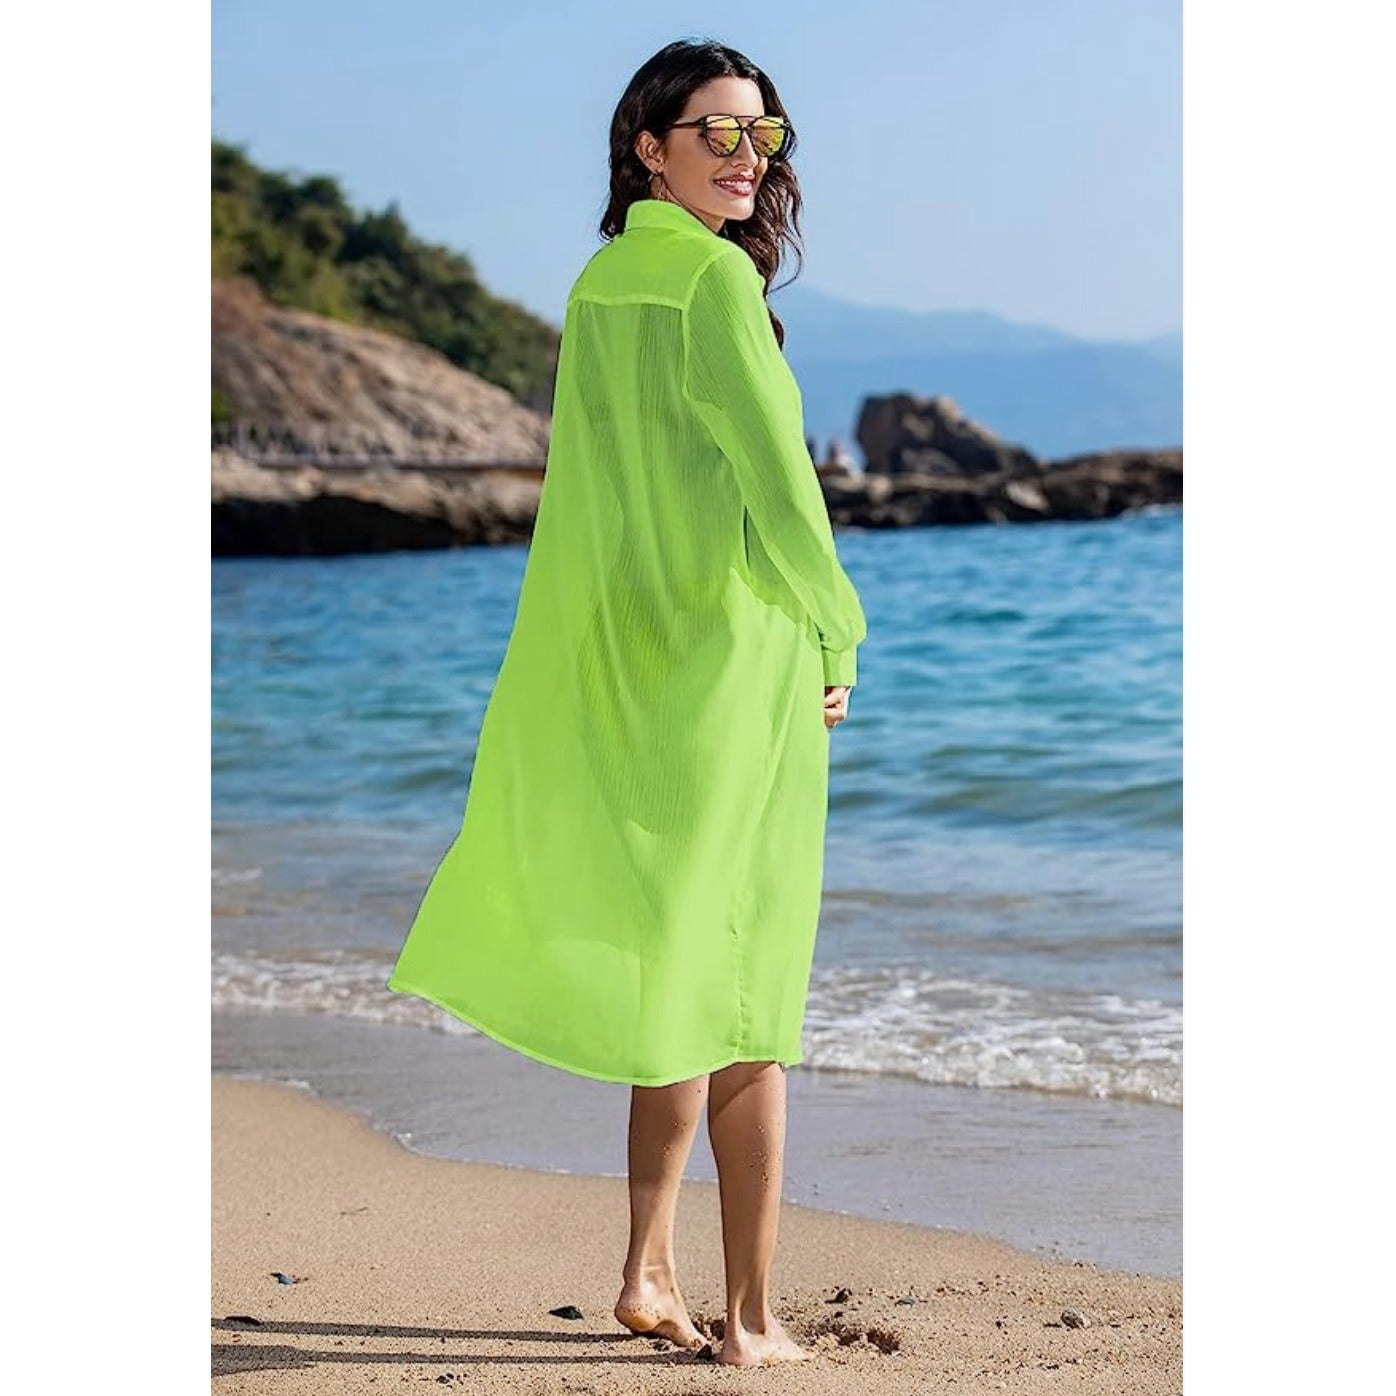 Model Wearing Women's Lime Green Beach Cover-Up